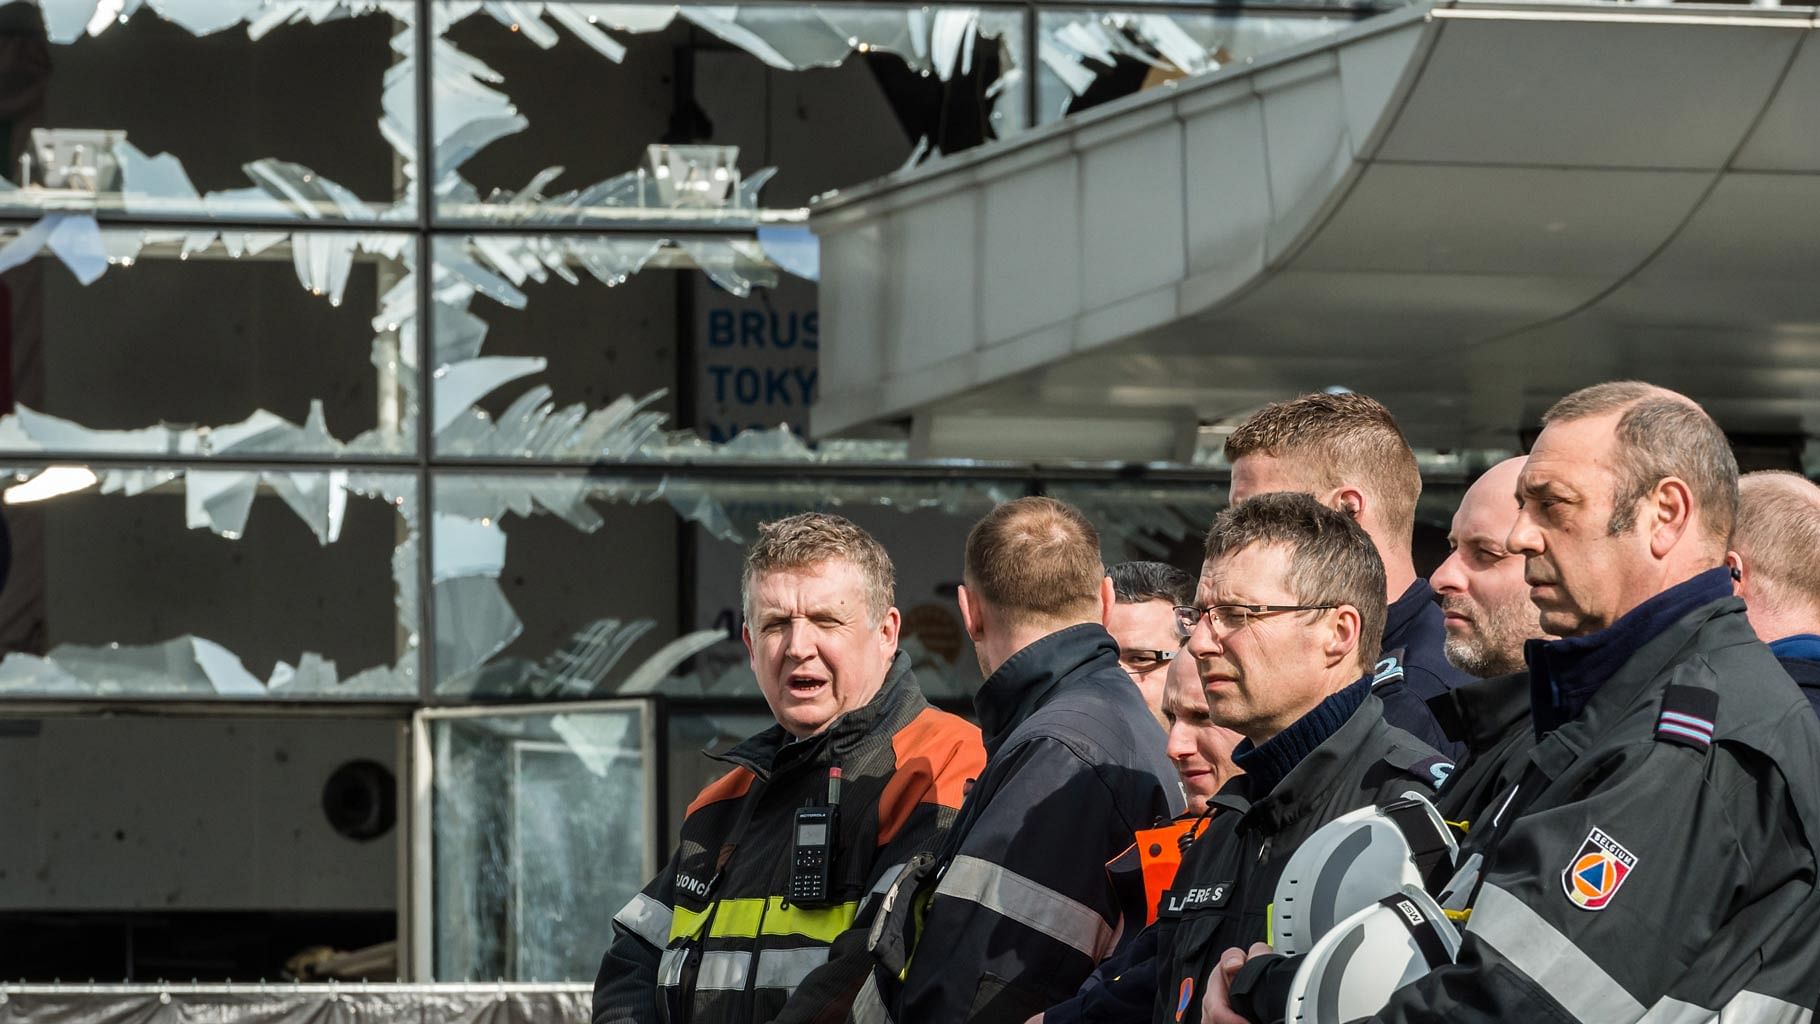 Firefighters and first responders stand next to blown out windows at Zaventem Airport in Brussels. (Photo: AP)